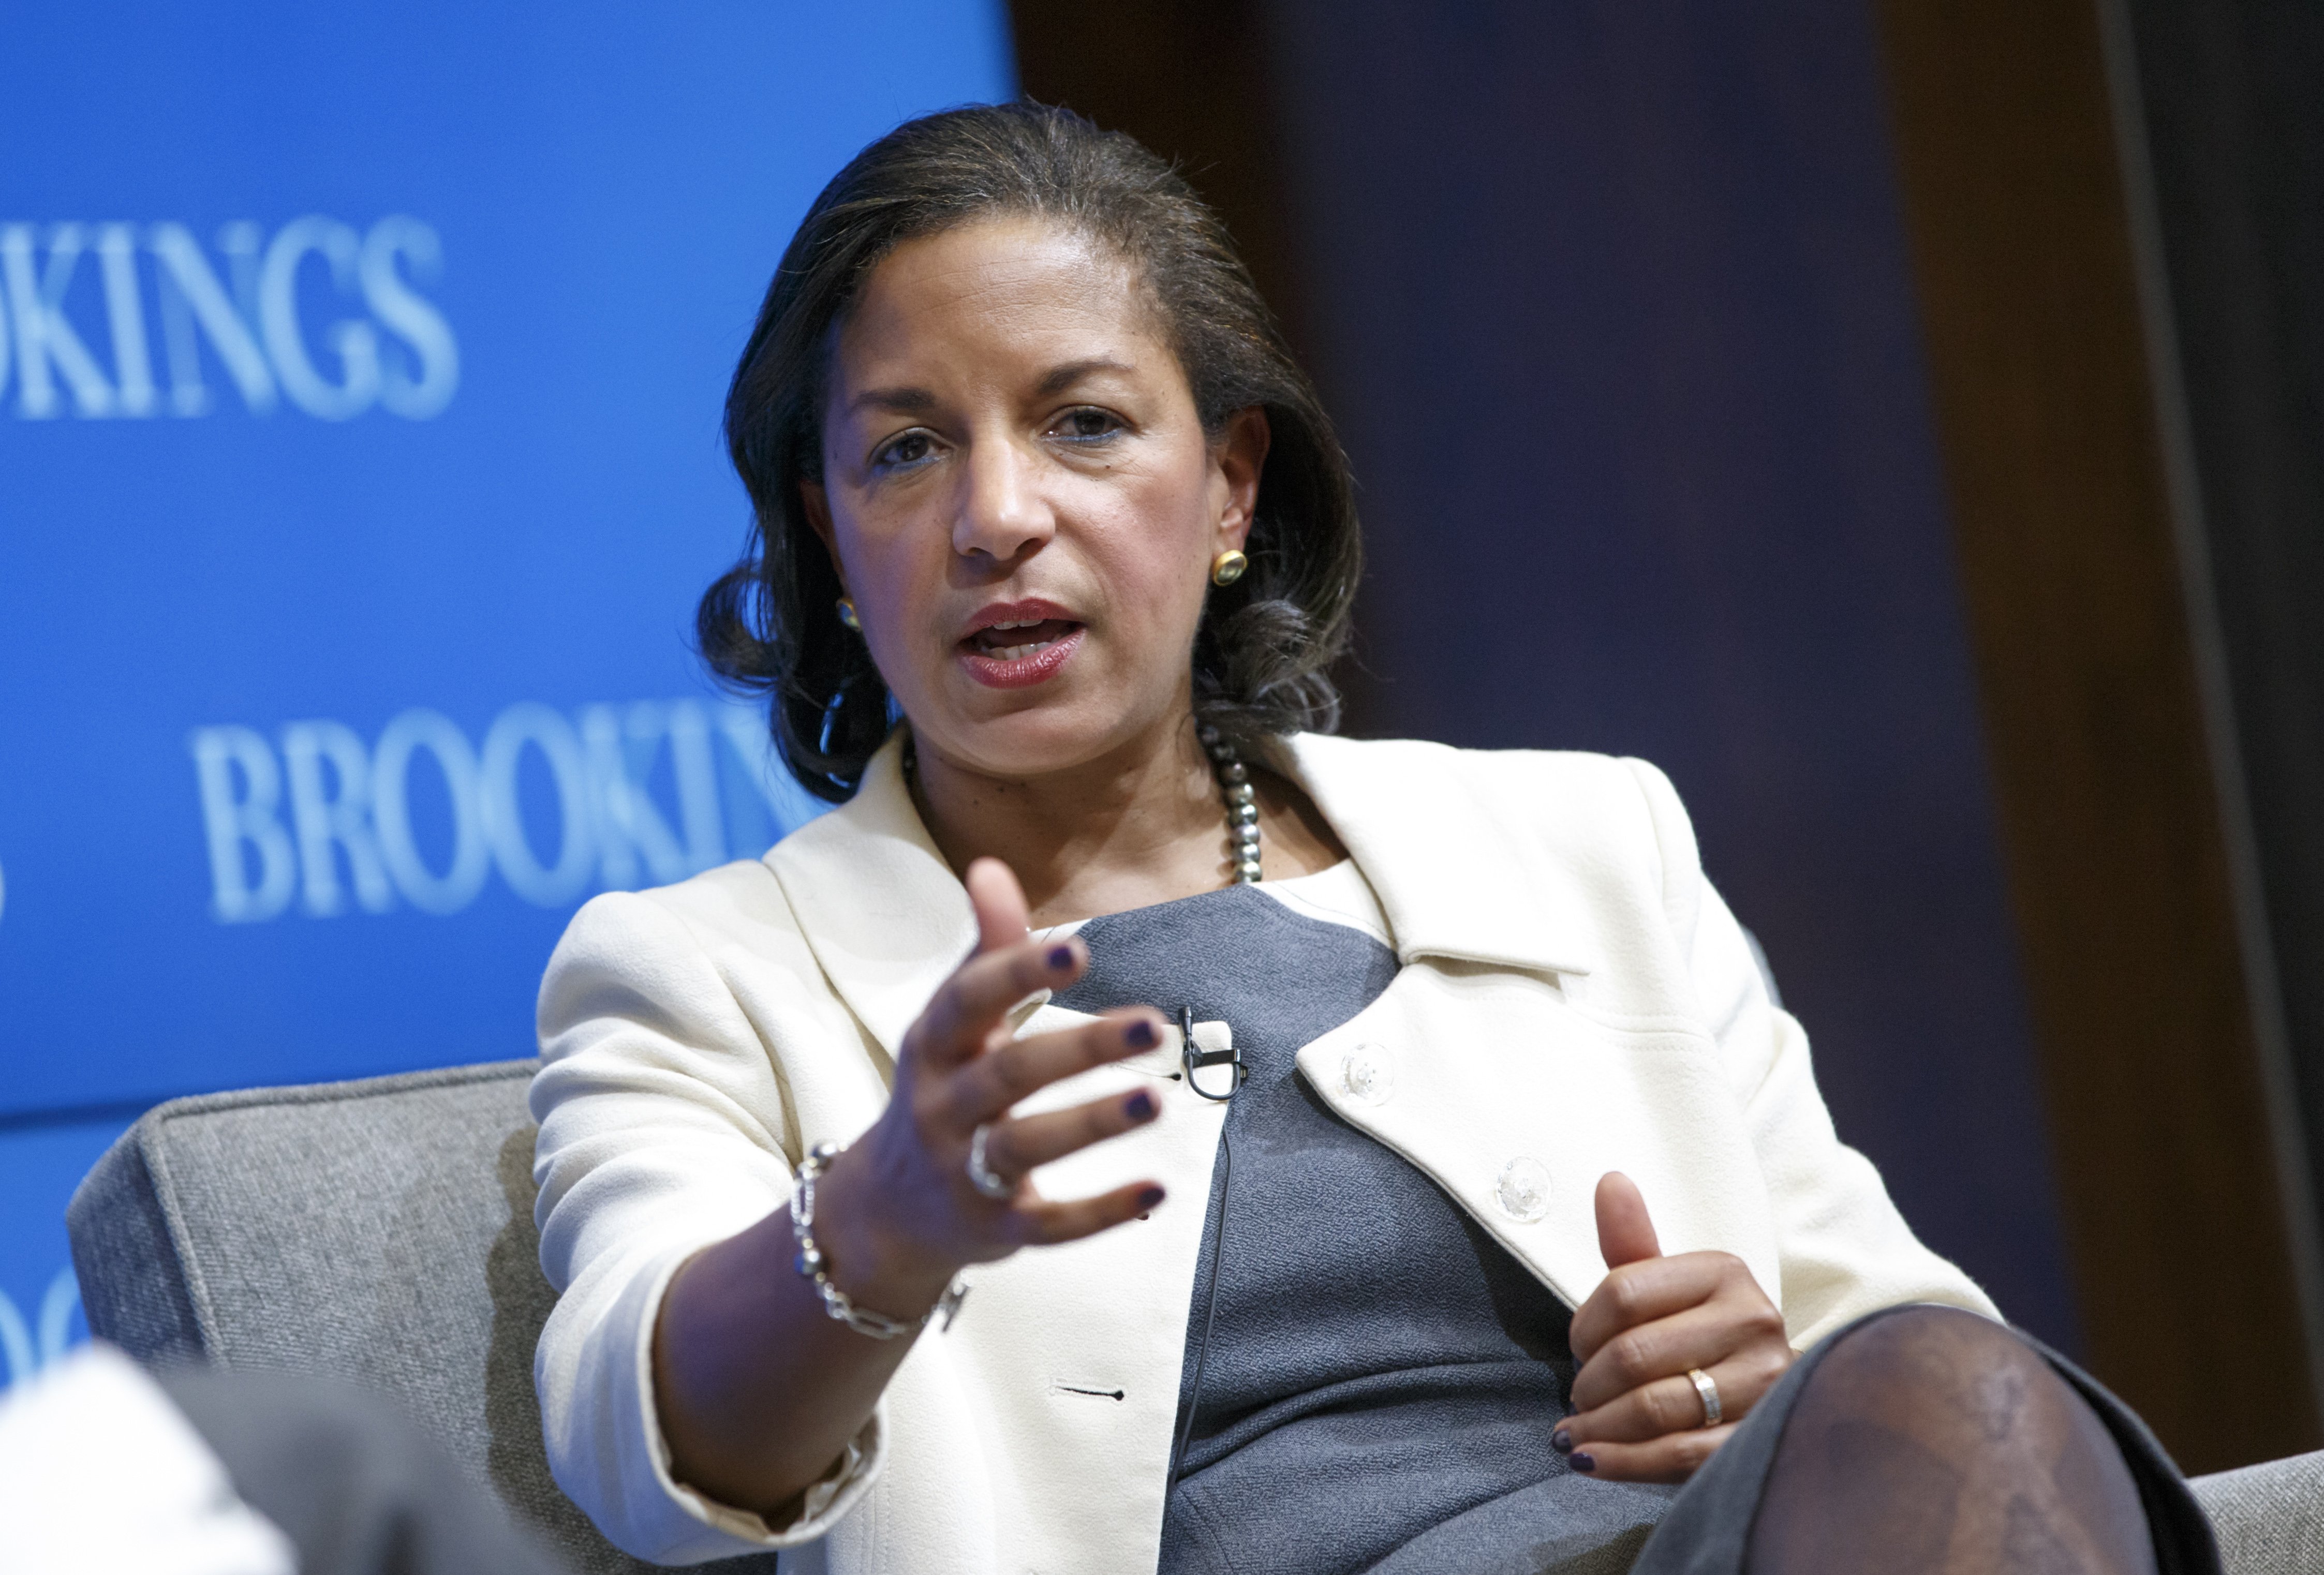 National Security Adviser Susan Rice speaks at the Brookings Institution to outline President Barack Obama's foreign policy priorities on Feb. 6, 2015, in Washington.